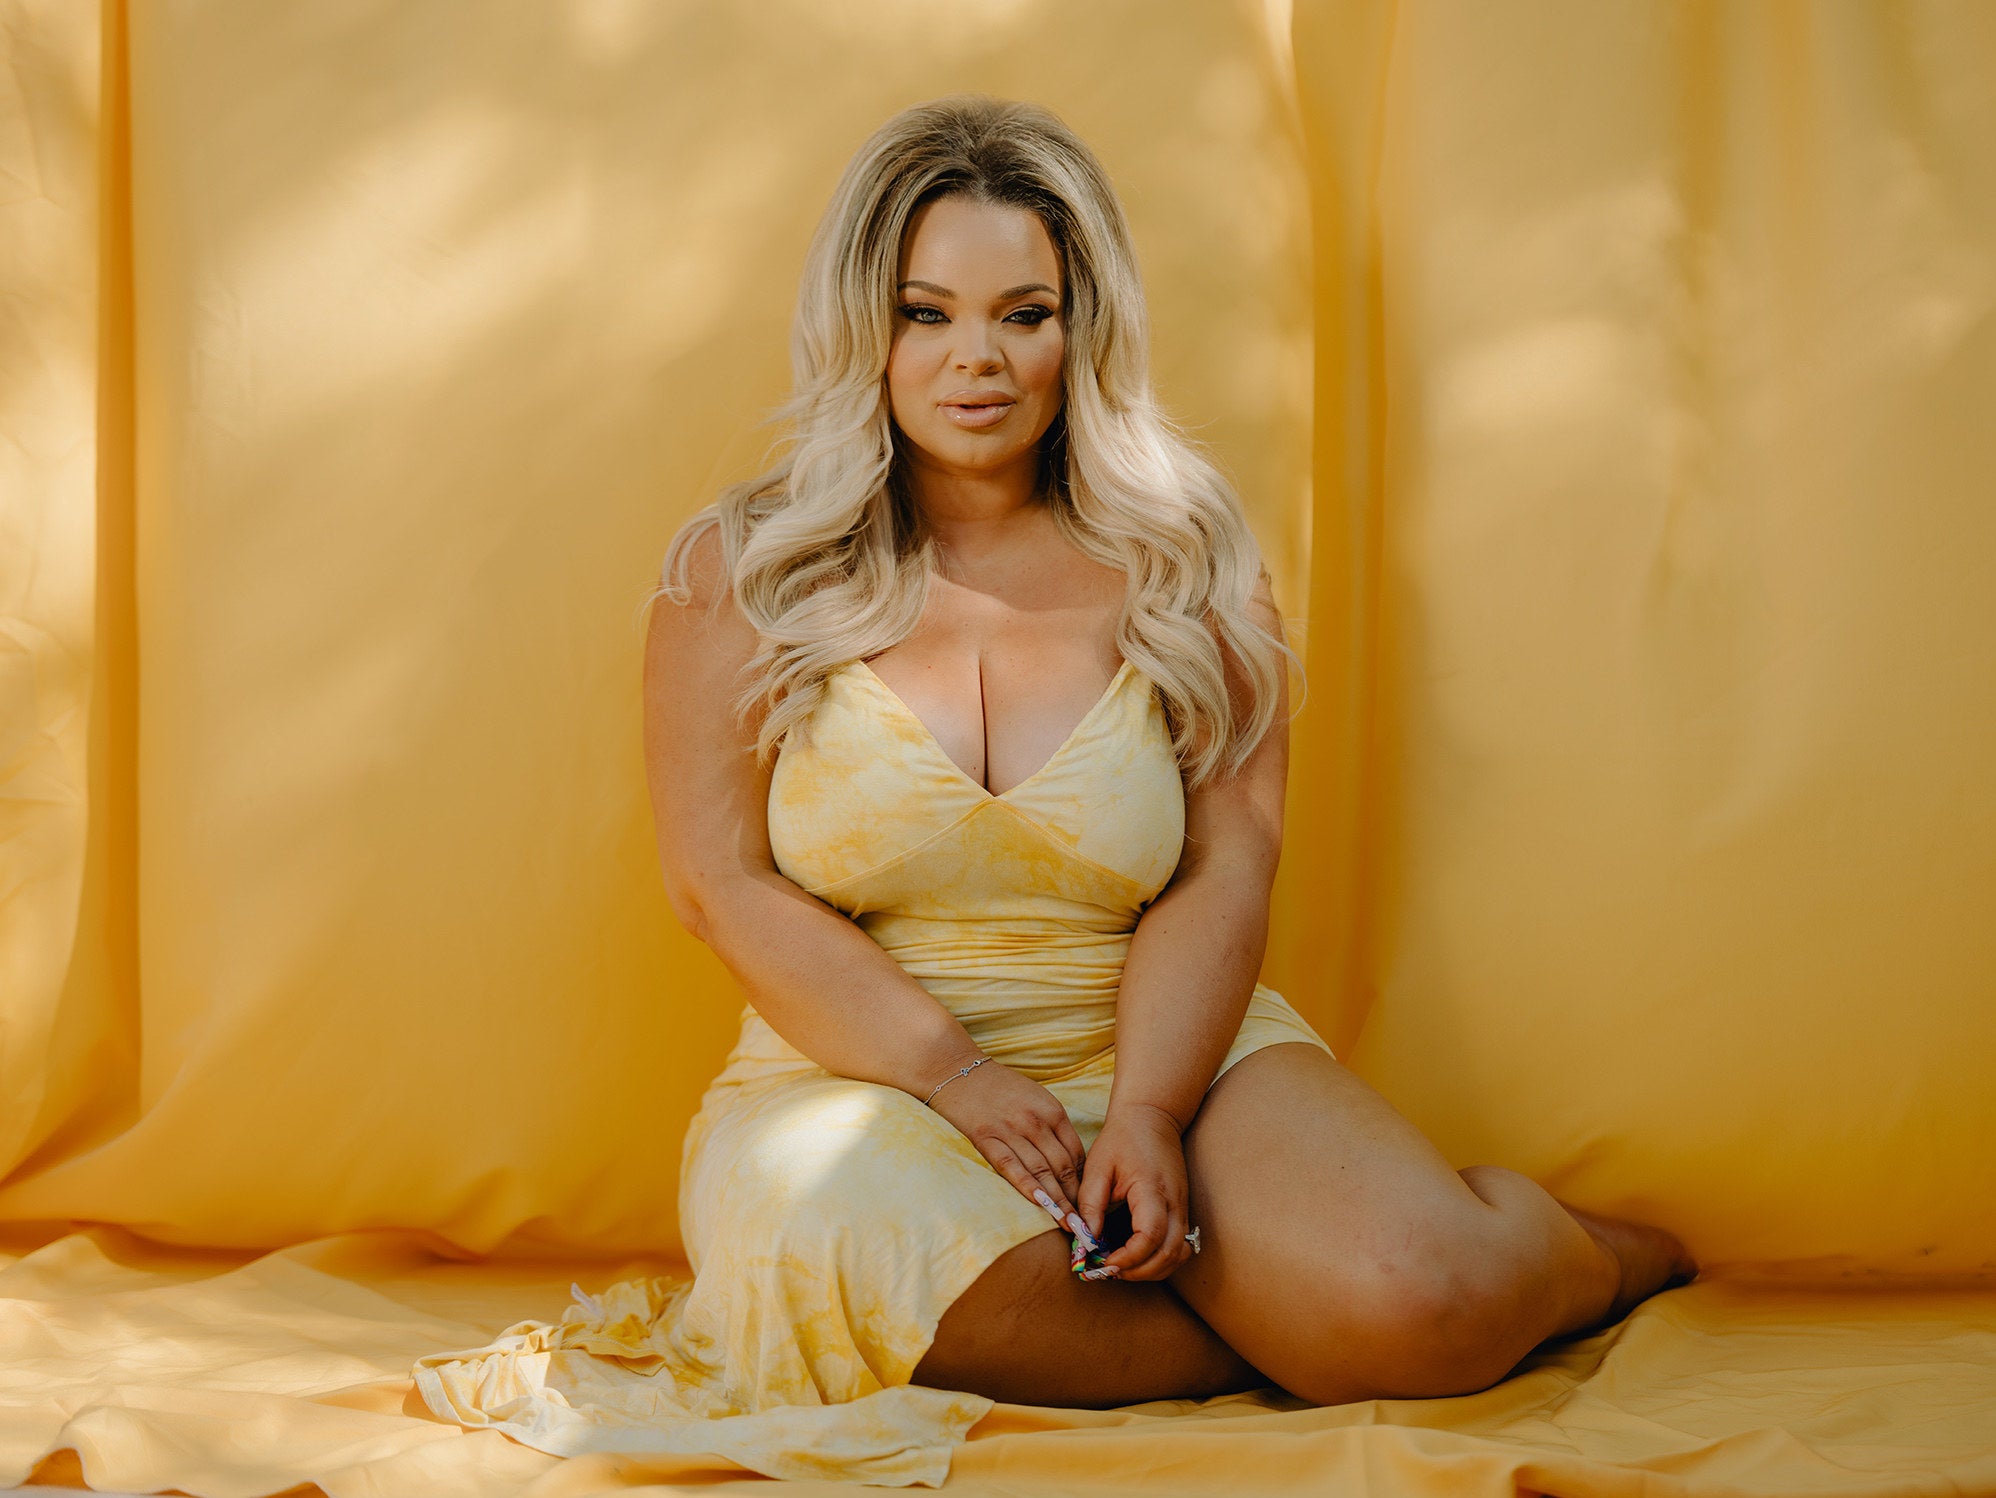 brittney creamer recommends trisha paytas nude photoshoot pic